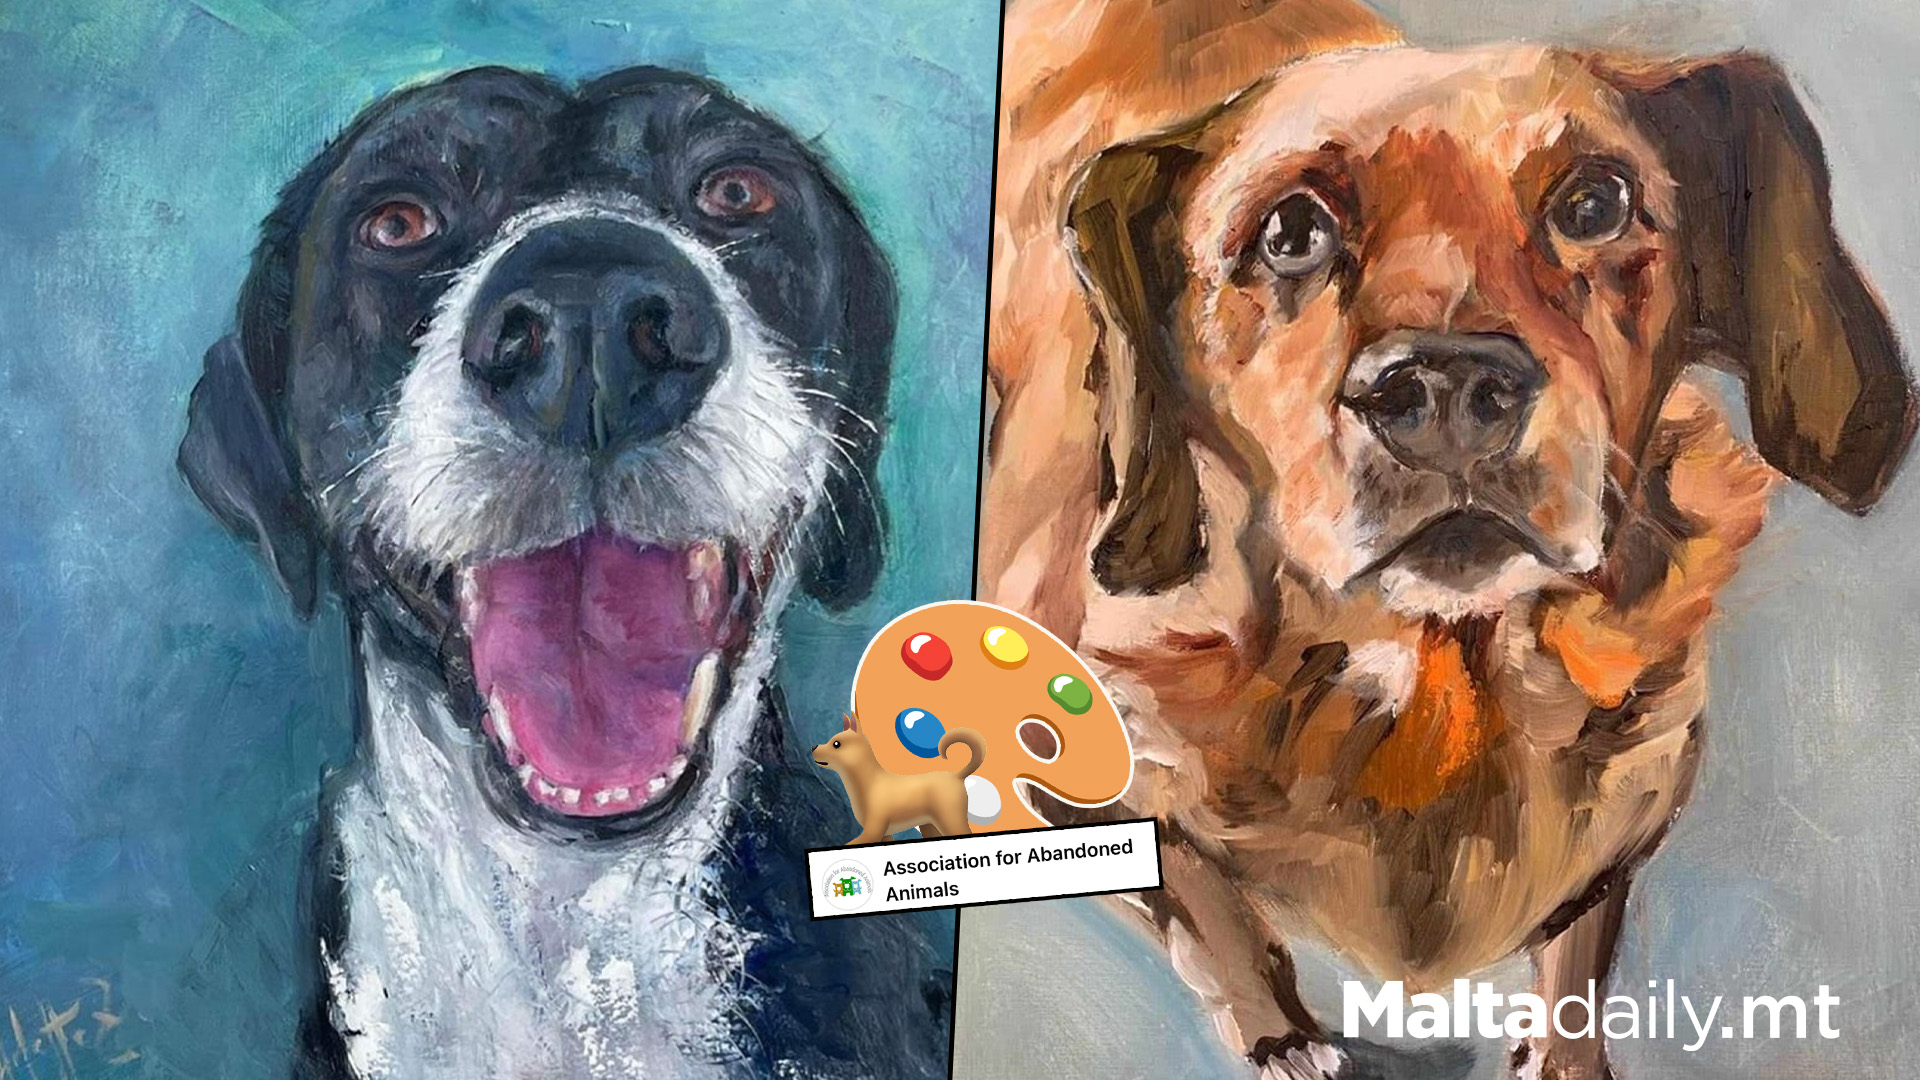 Maltese Artists Painting Shelter Dogs To Raise Funds